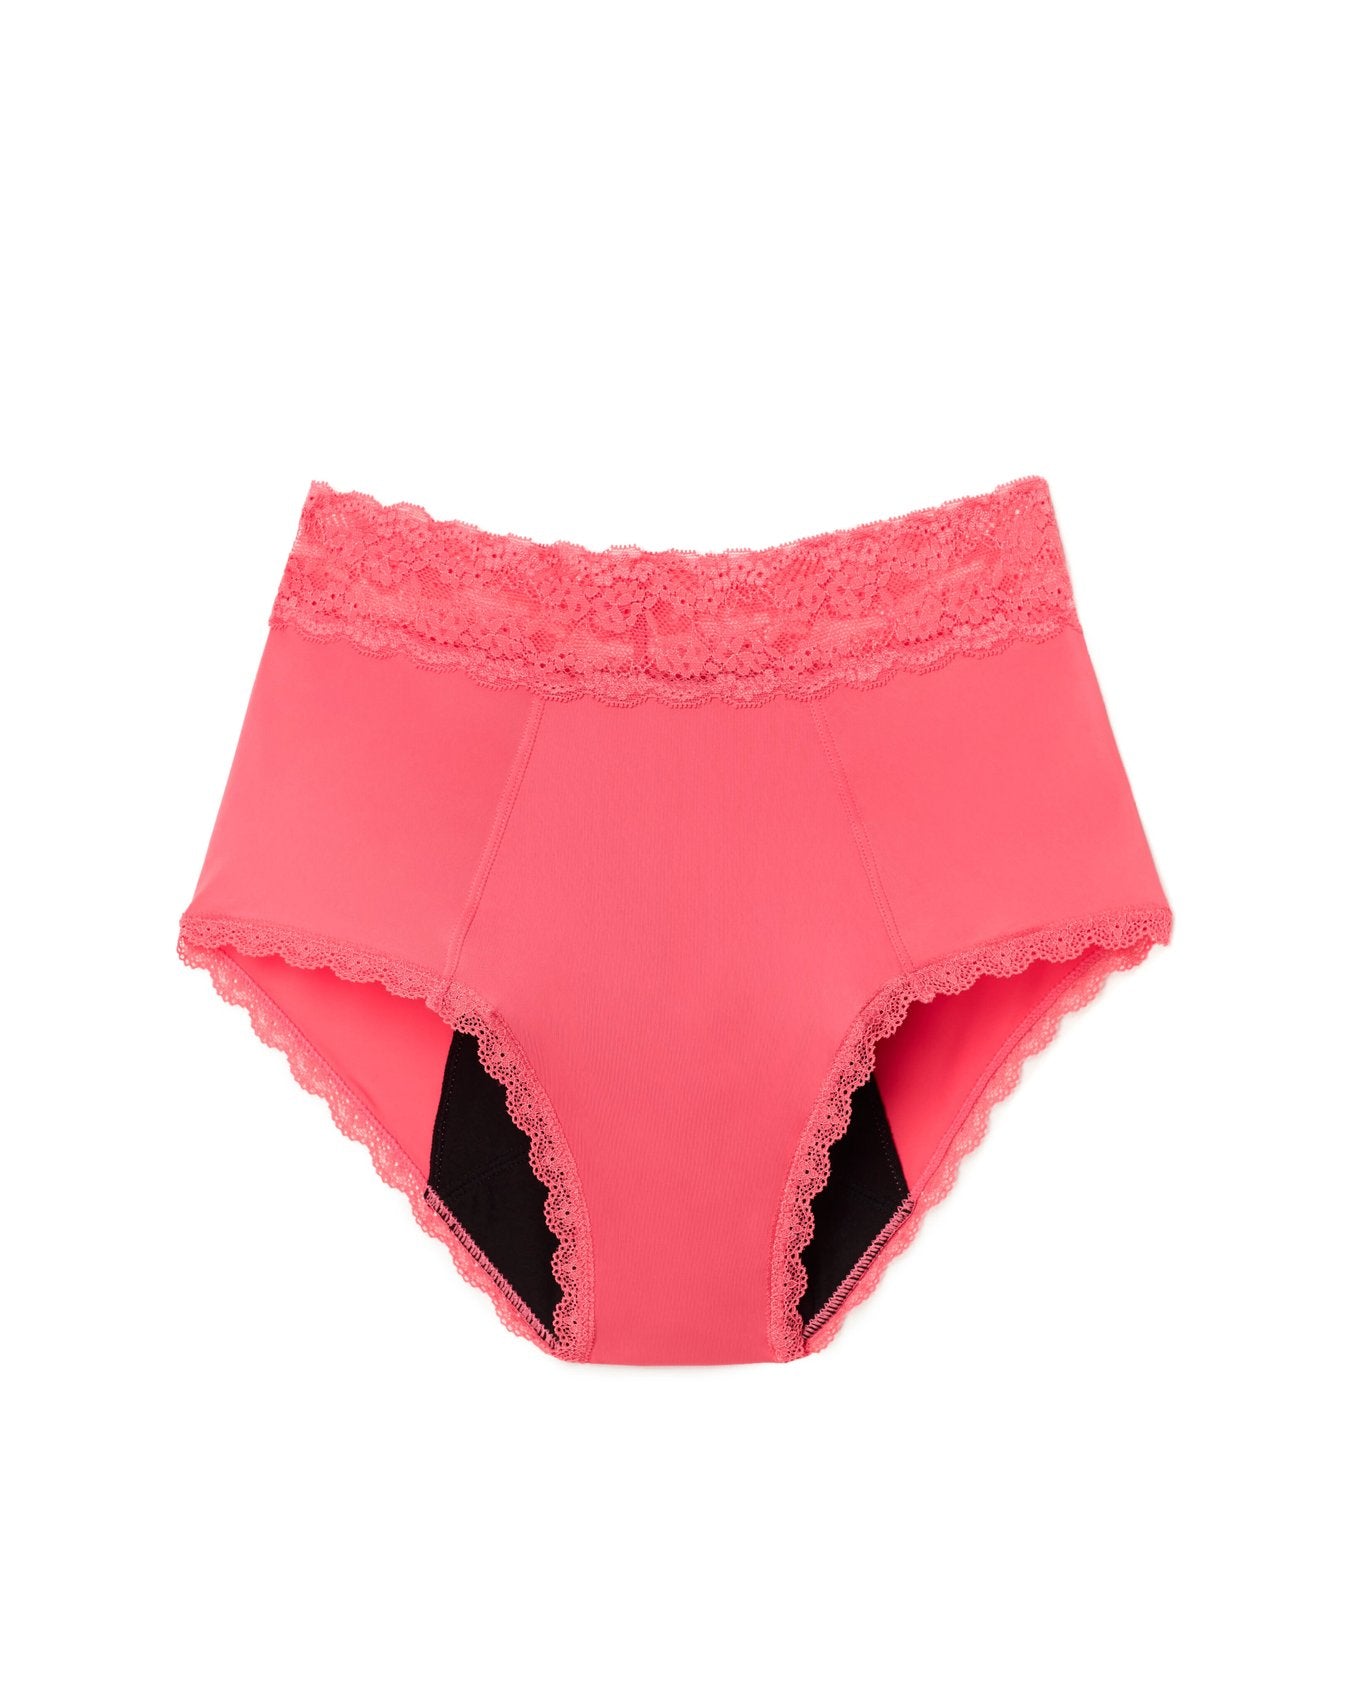 Joyja Amelia period-proof panty in color Sunkist Coral and shape high waisted